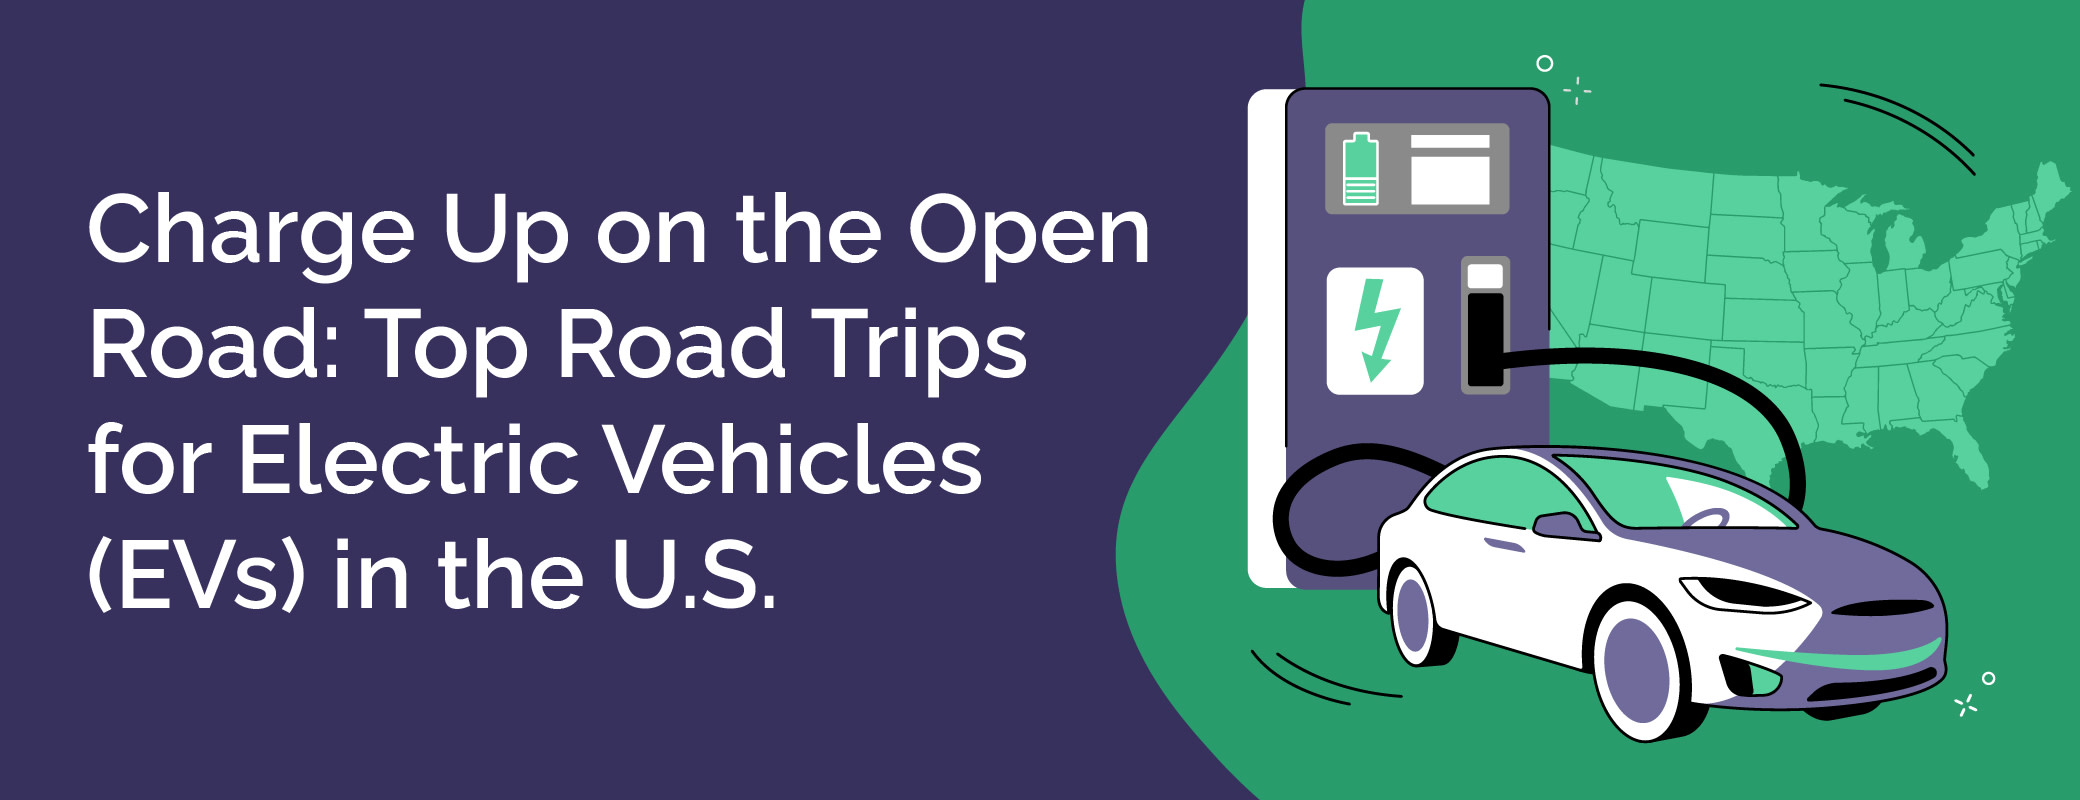 Lantern Shareable Asset 5 Top Road Trips for Electric Vehicles Main Header